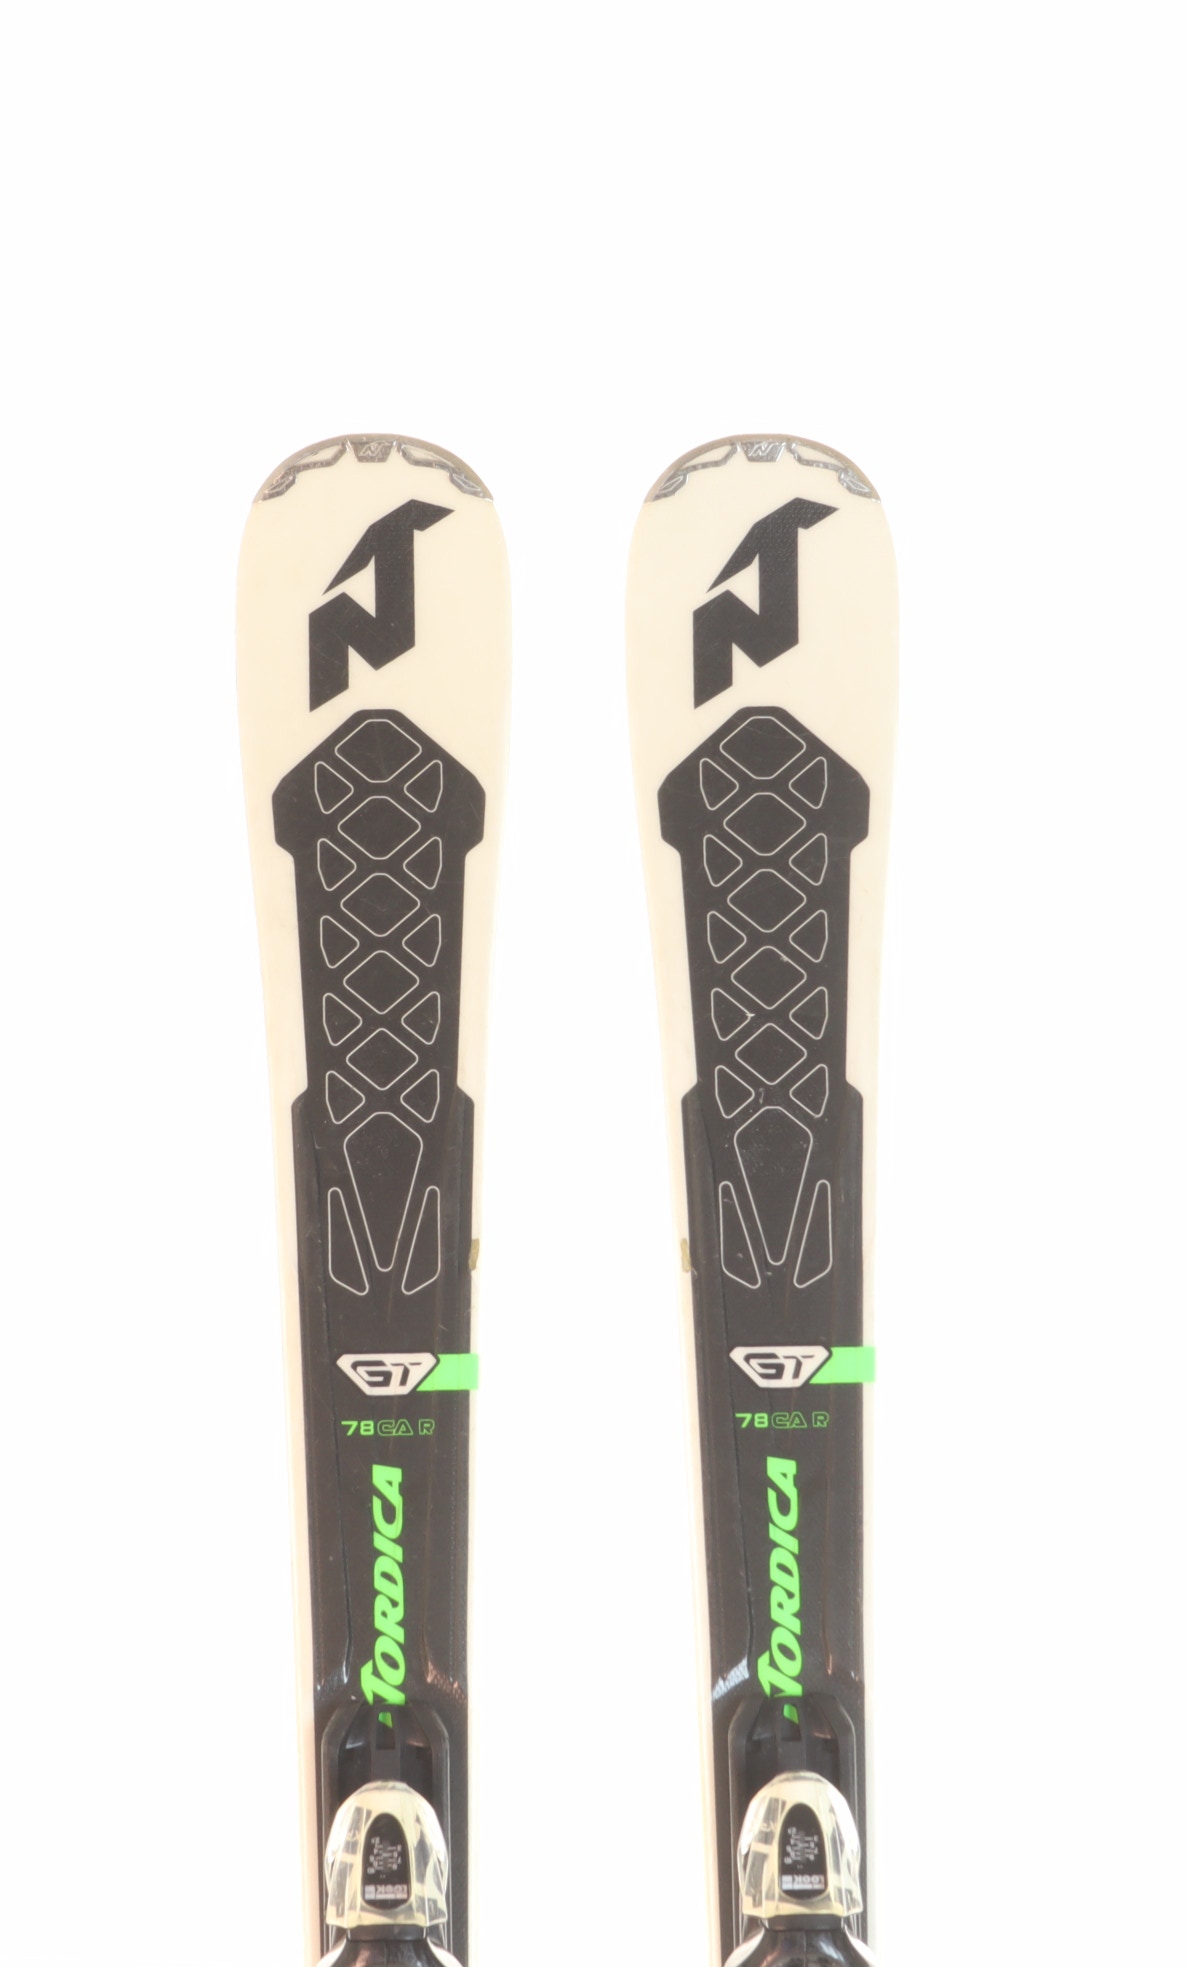 Used 2018 Nordica GT 78 R Skis With Look XPress 10 Bindings Size 152 (Option 230627)